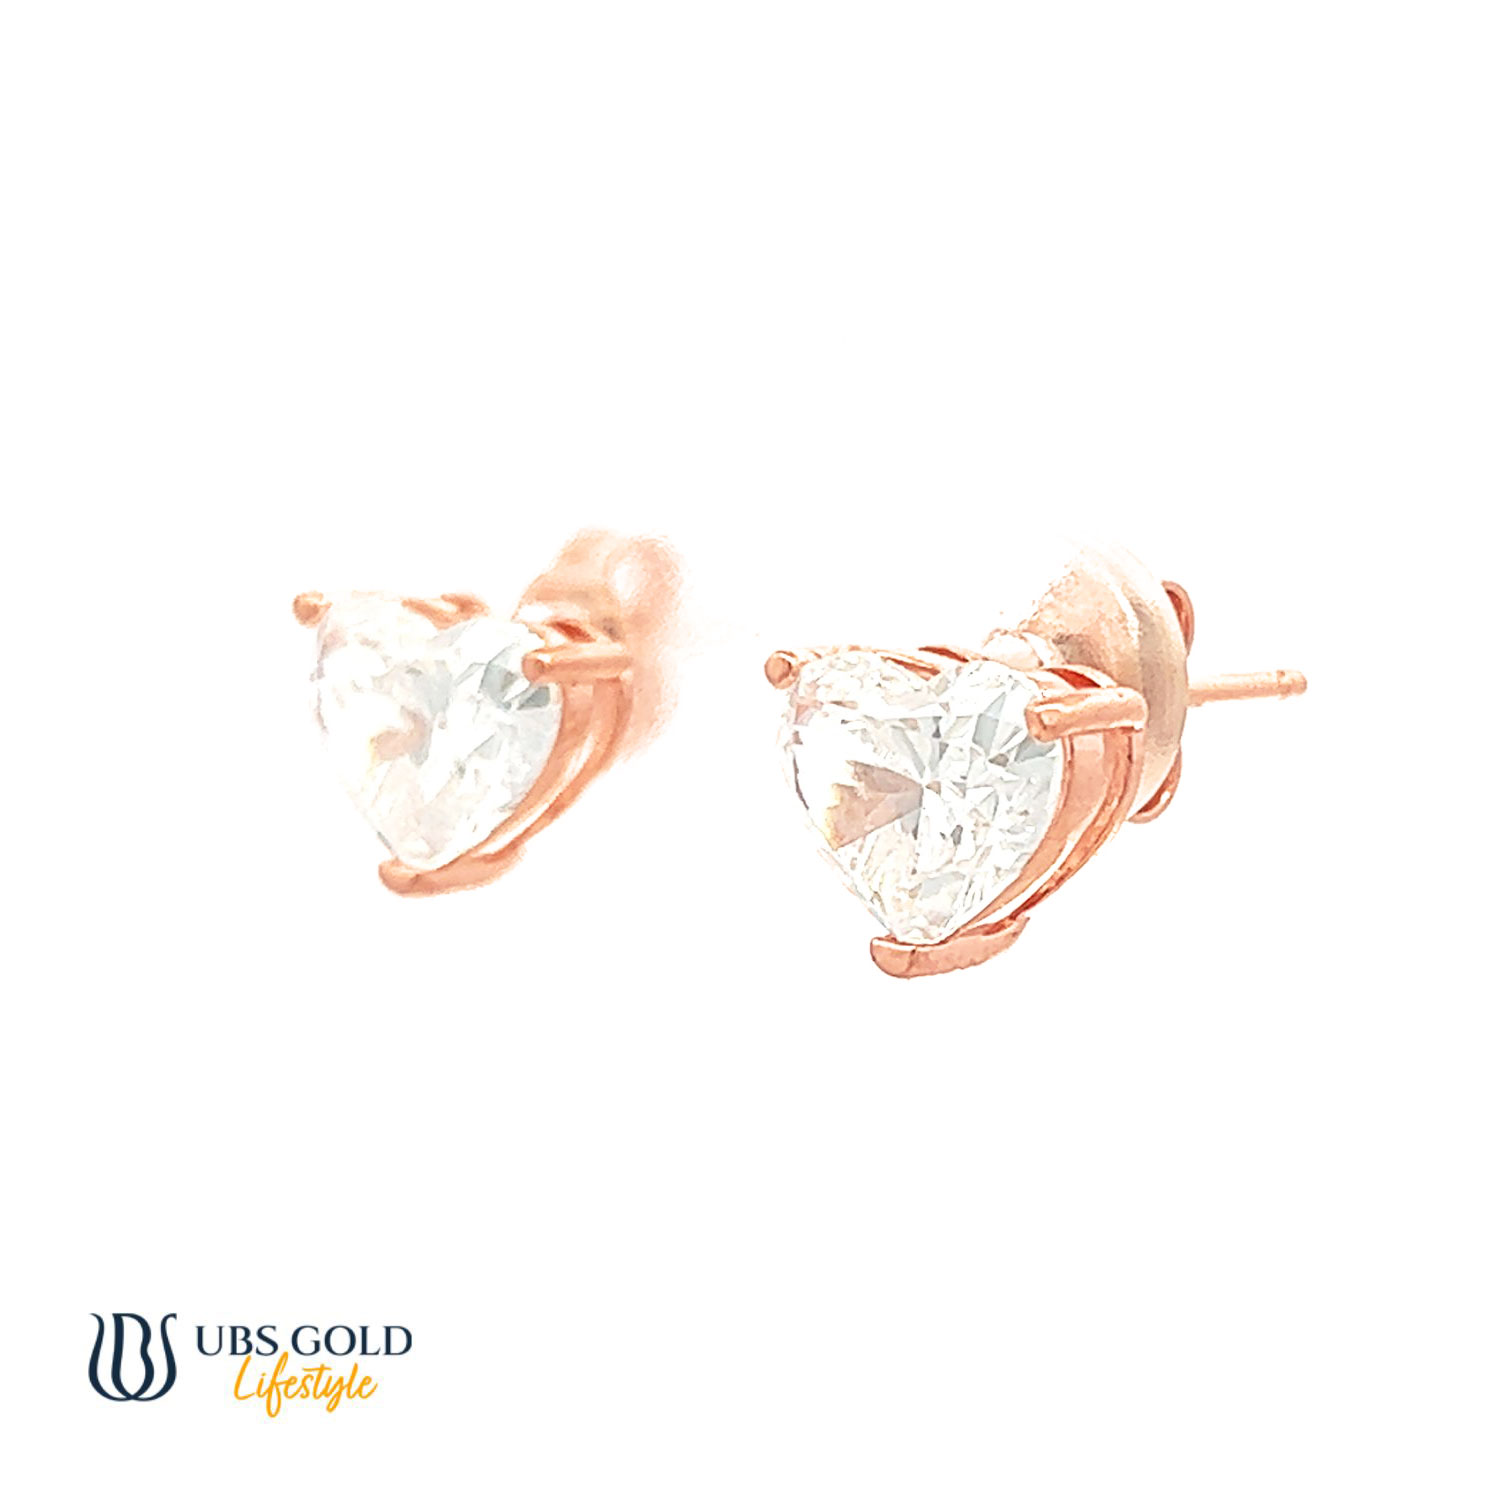 UBS Gold Anting Emas Serina Le Solitaire - Ksw0978 - 17K